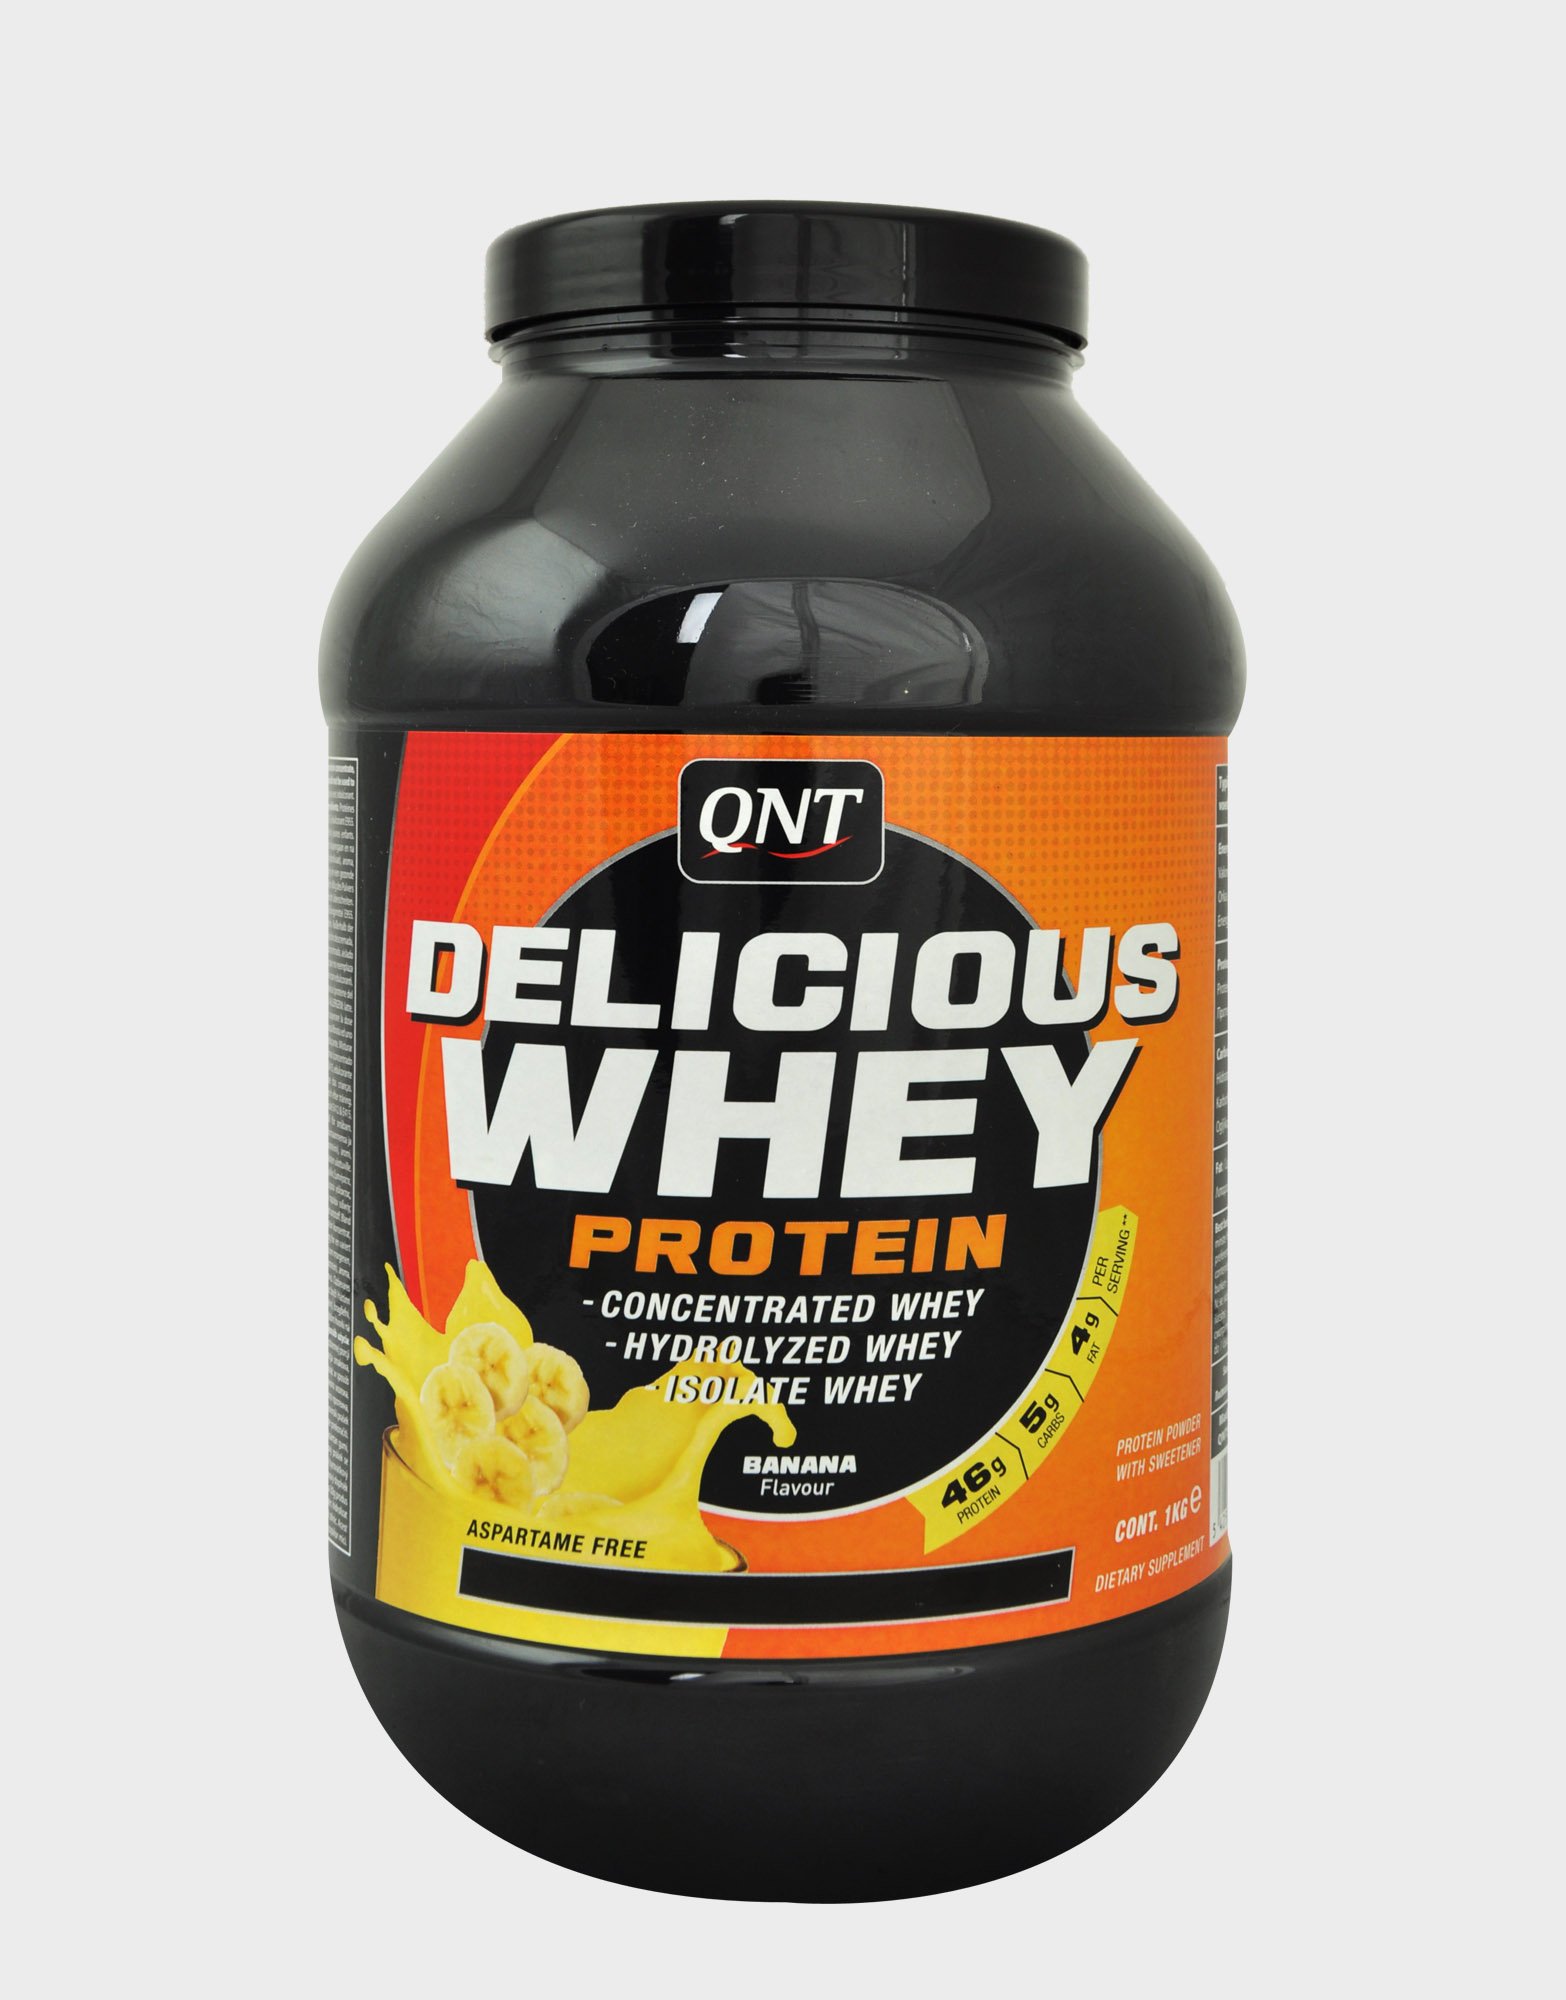 Delicious Whey Protein, 1000 g, QNT. Whey Concentrate. Mass Gain स्वास्थ्य लाभ Anti-catabolic properties 